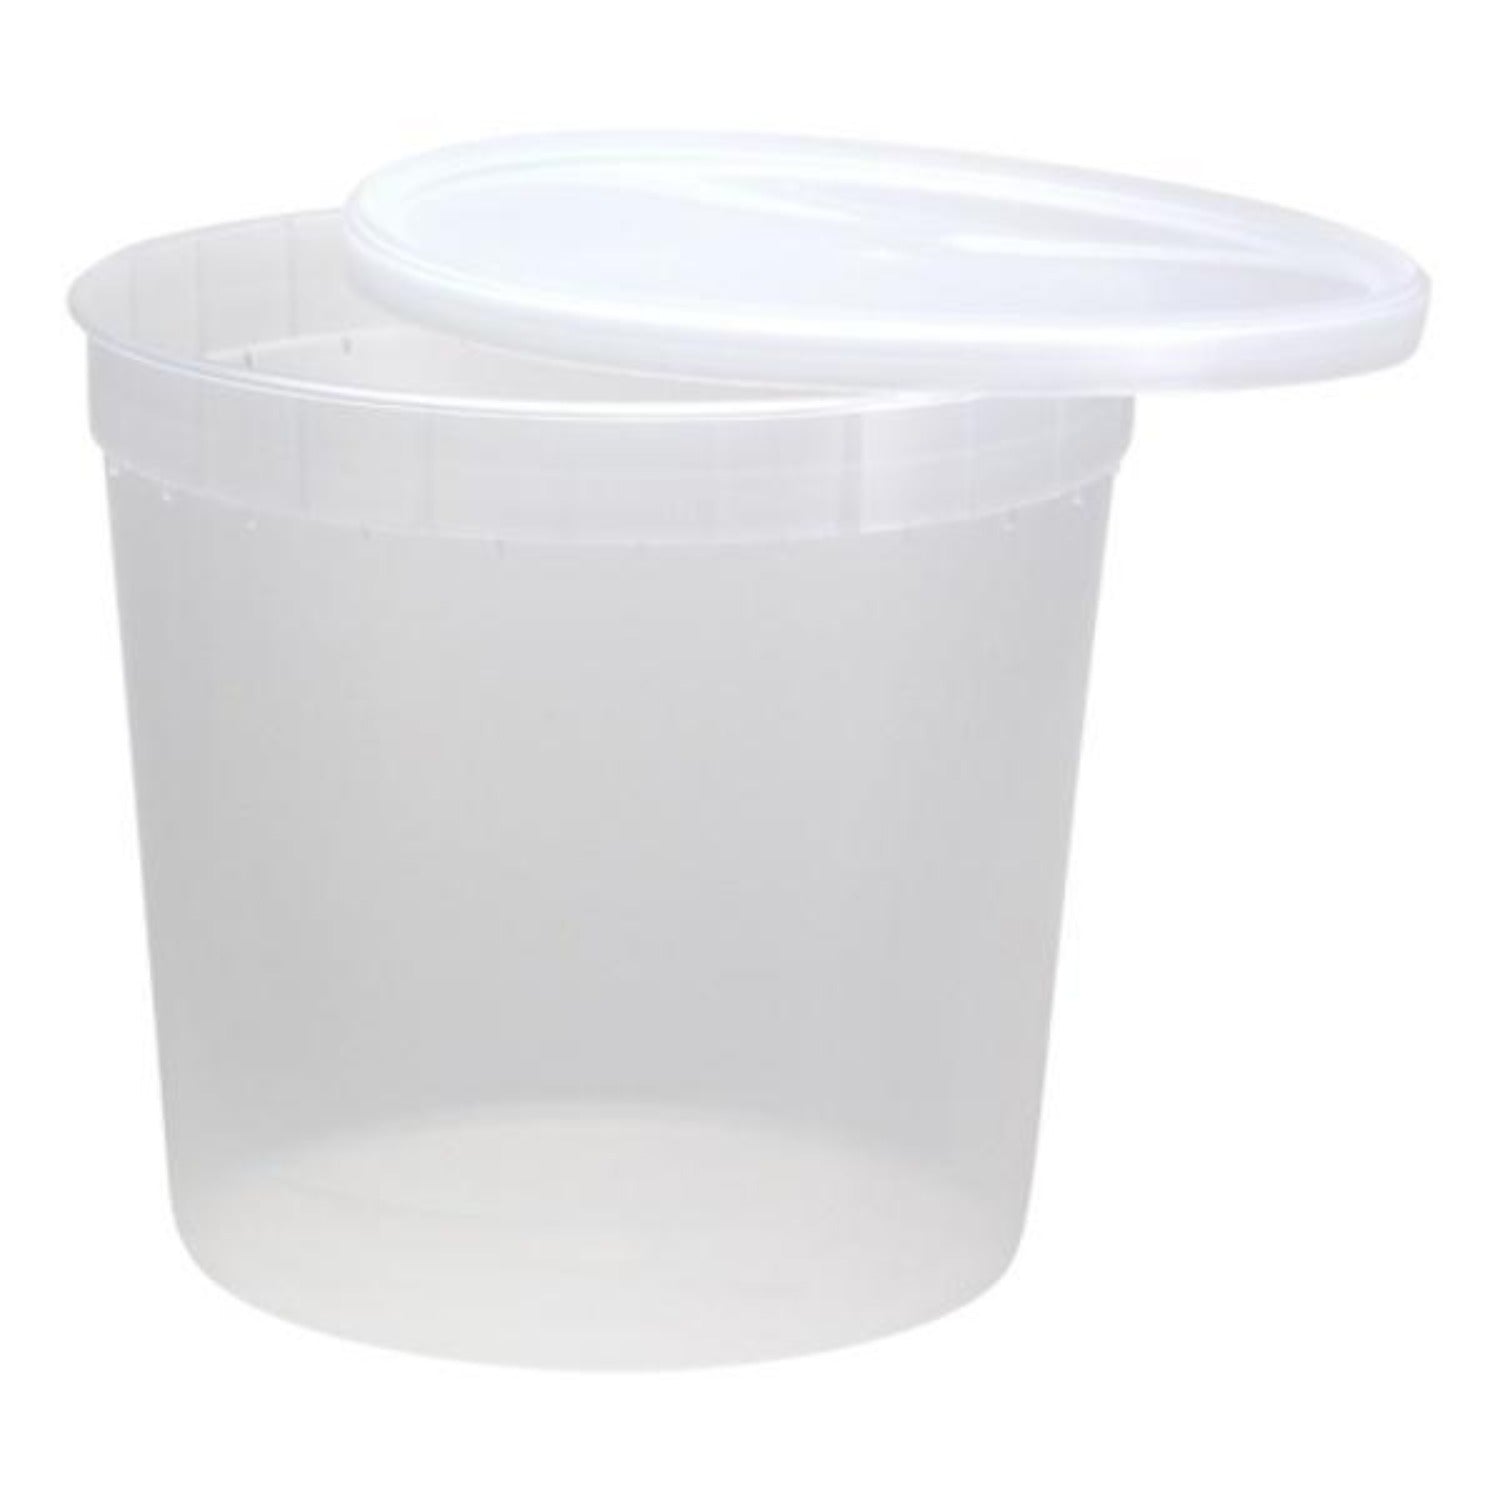 Container with Lid - Plastic